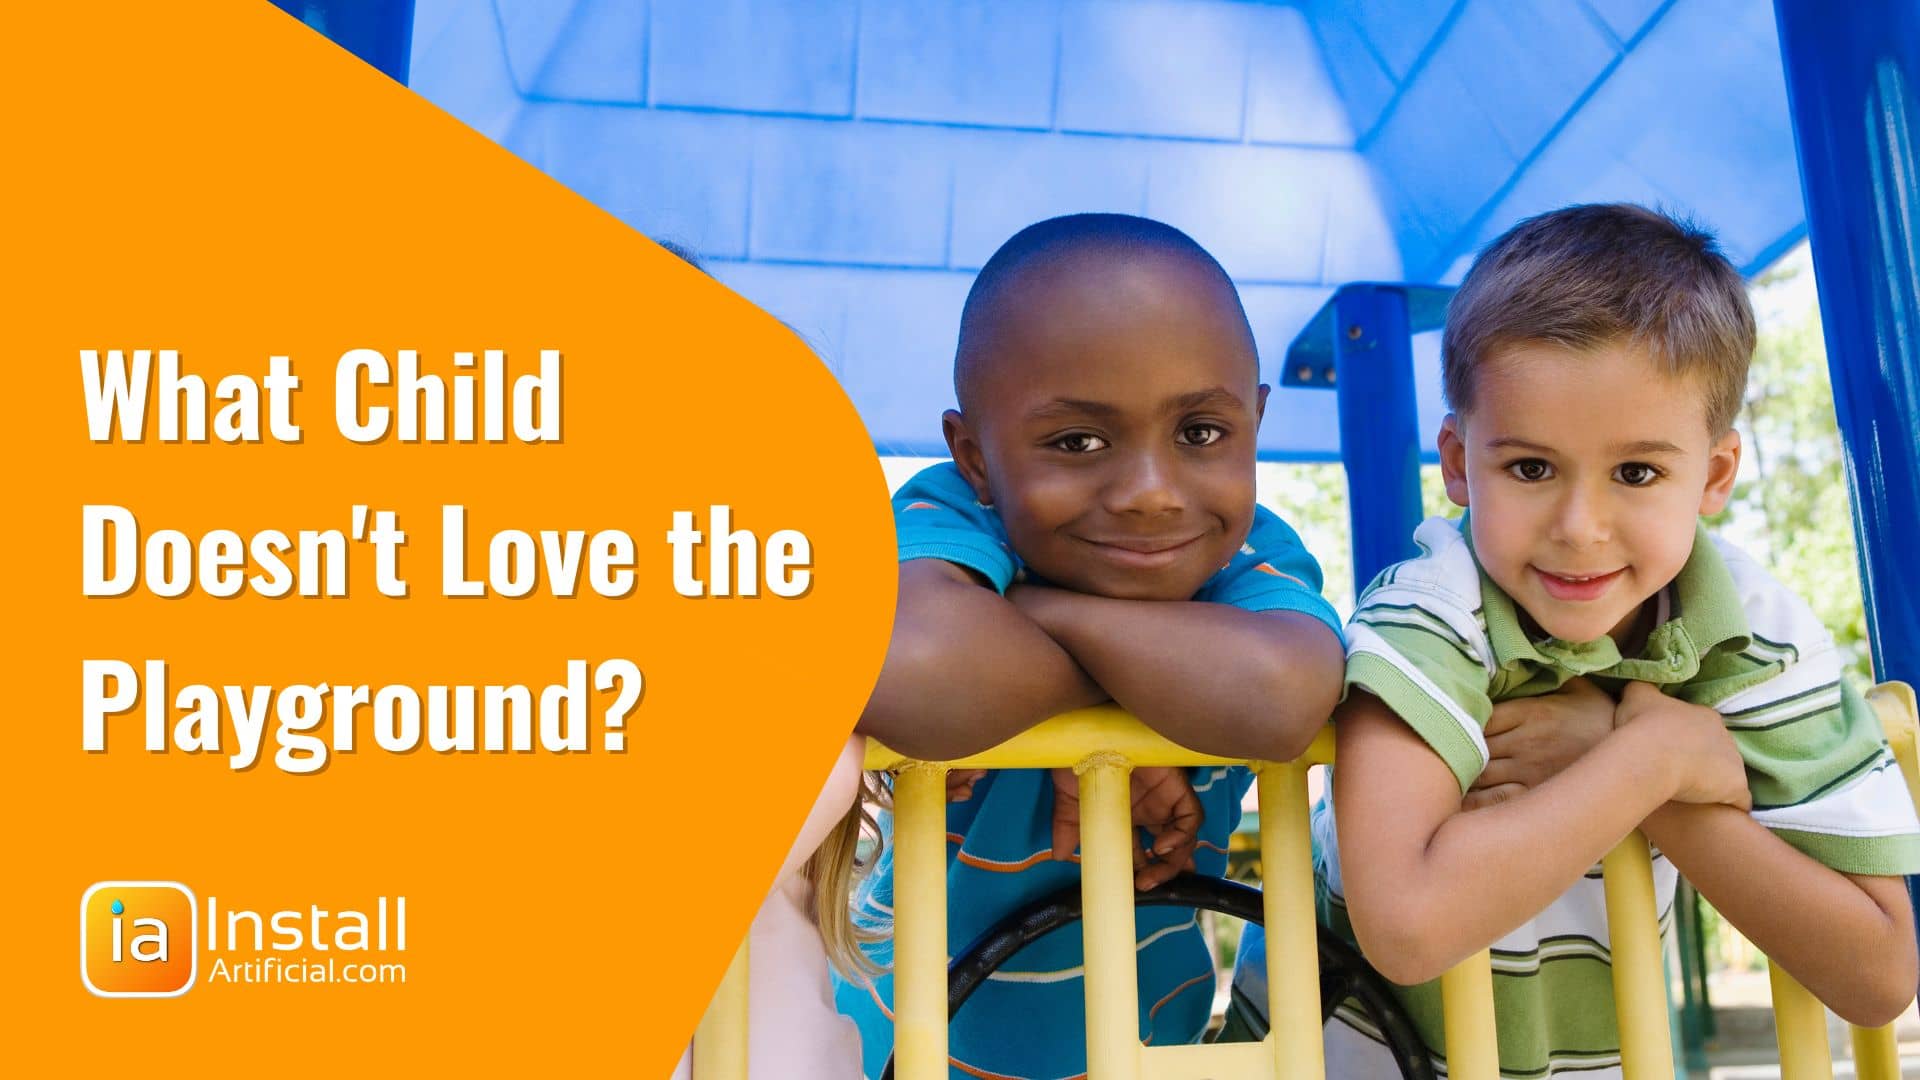 What Child doesn’t love the playground?